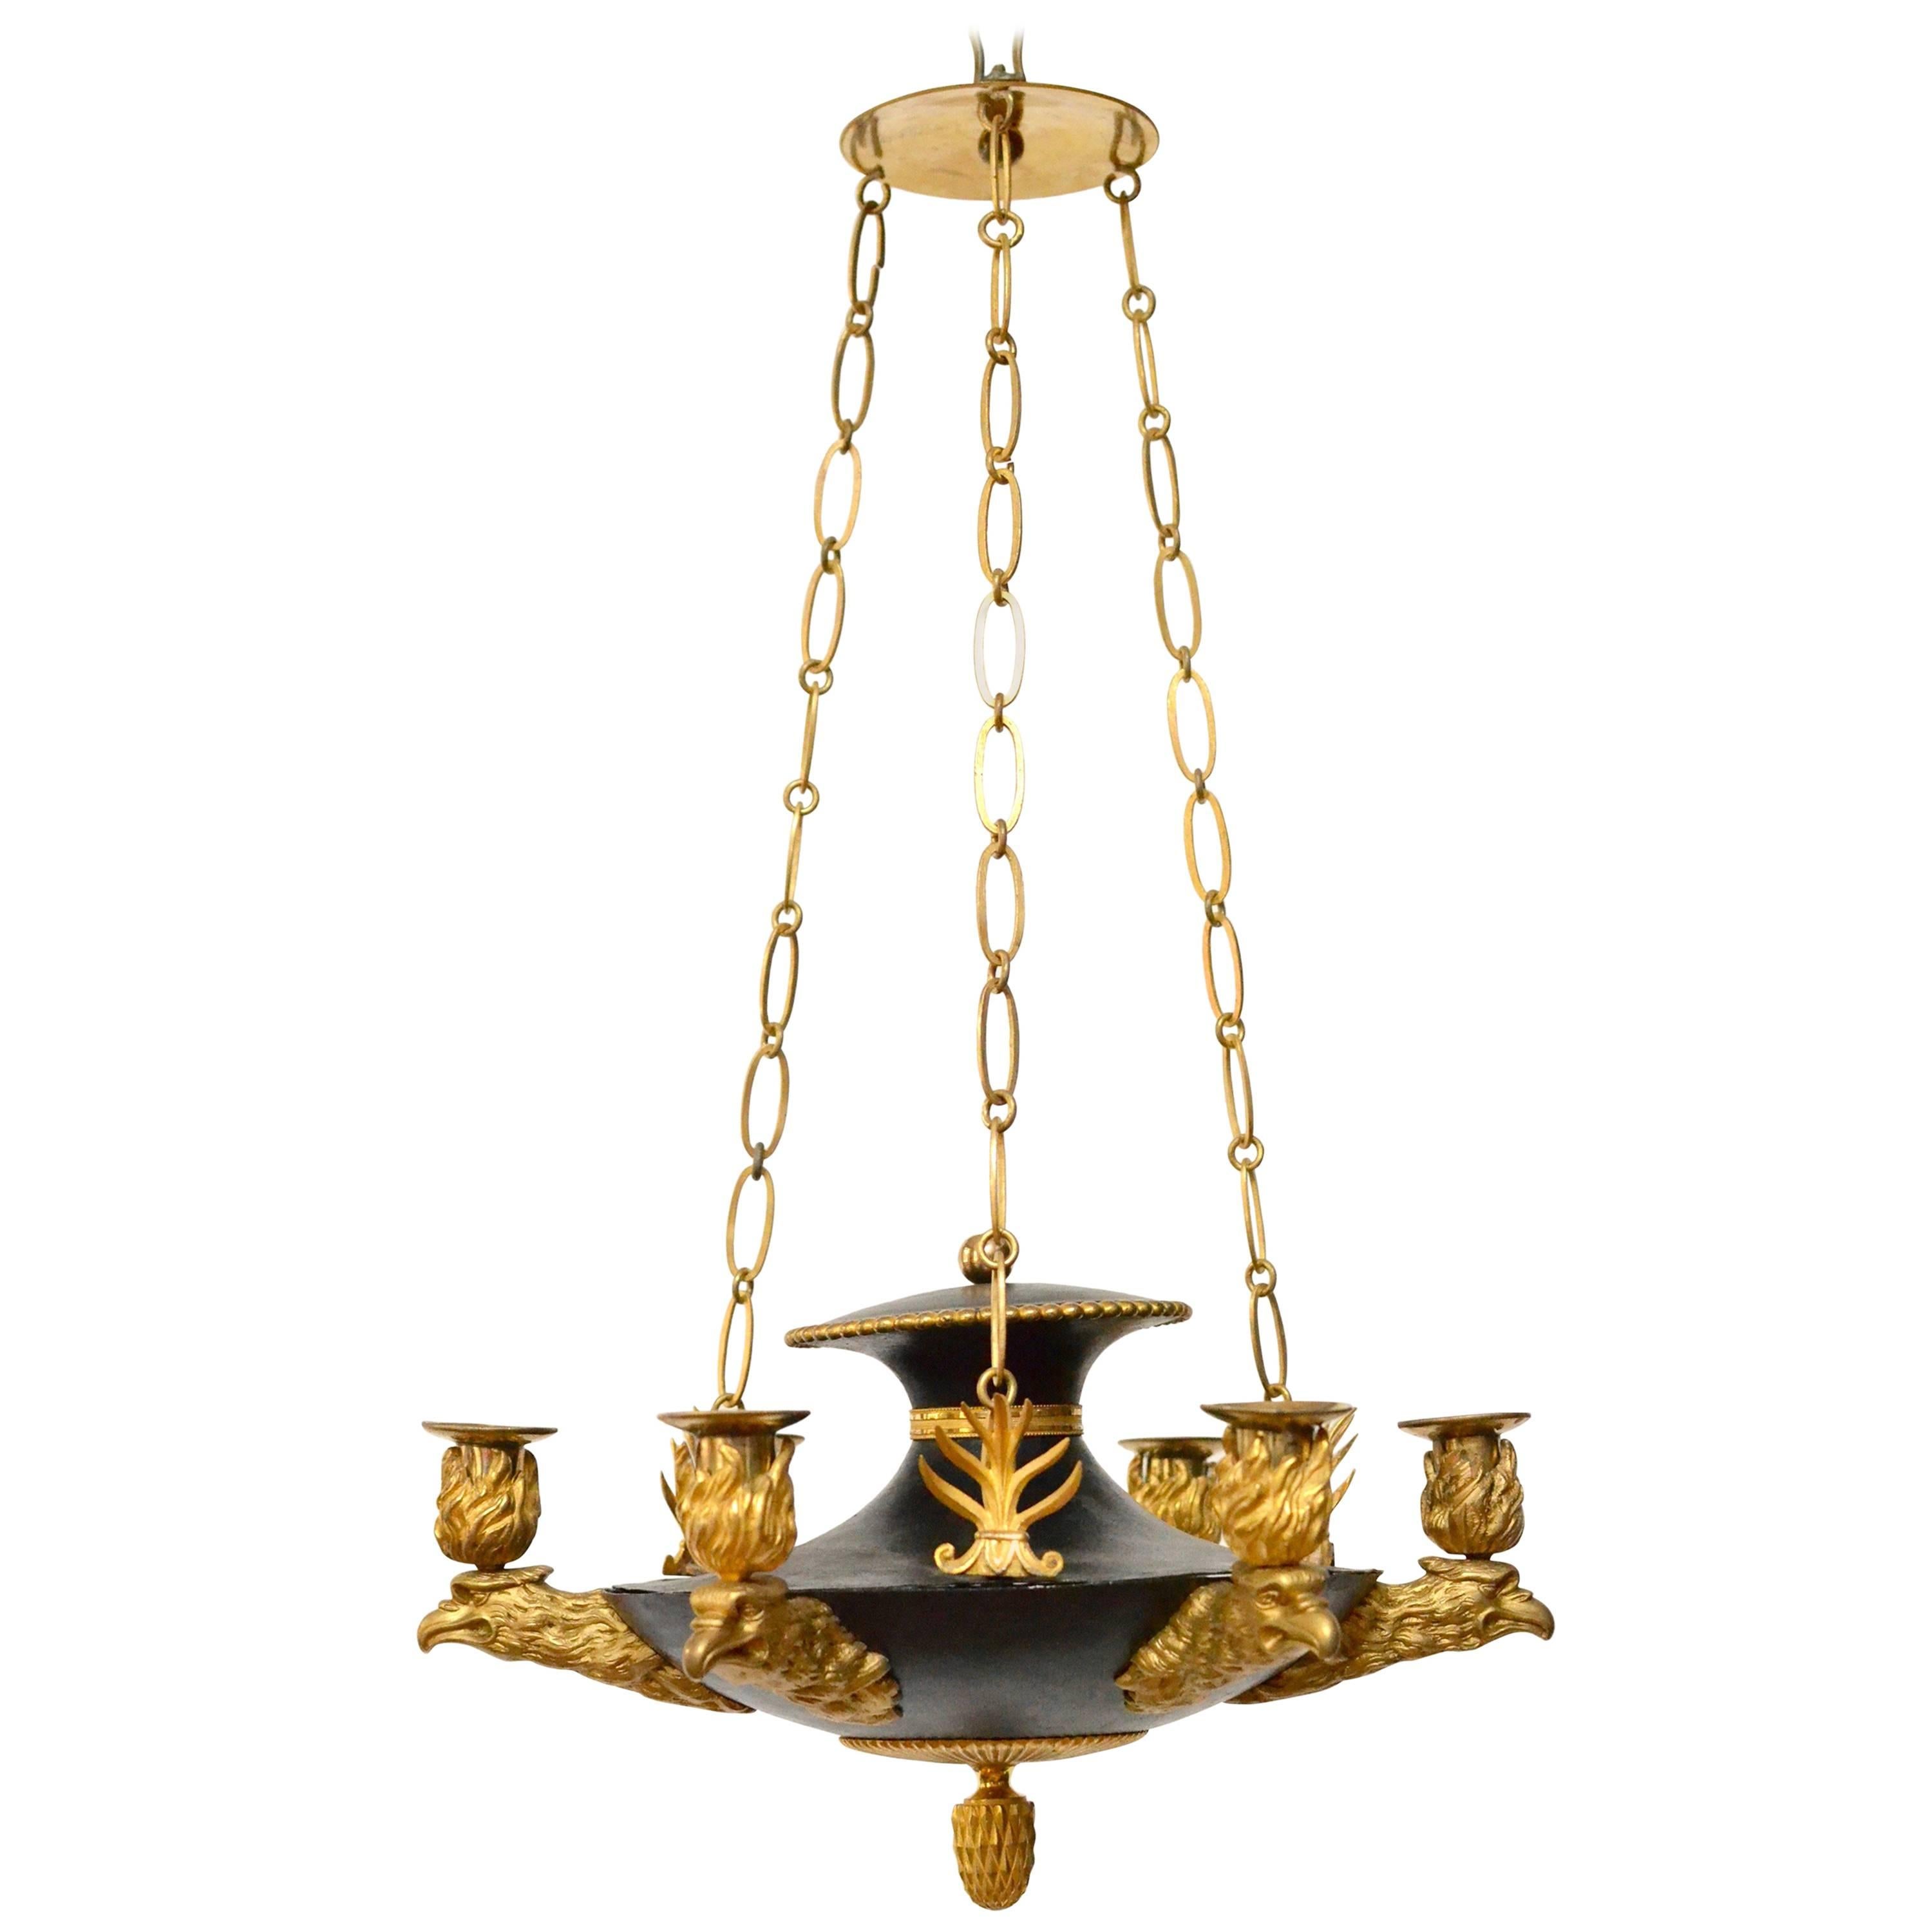 Swedish Six-Light Gilt-Bronze and Patinated Empire Chandelier